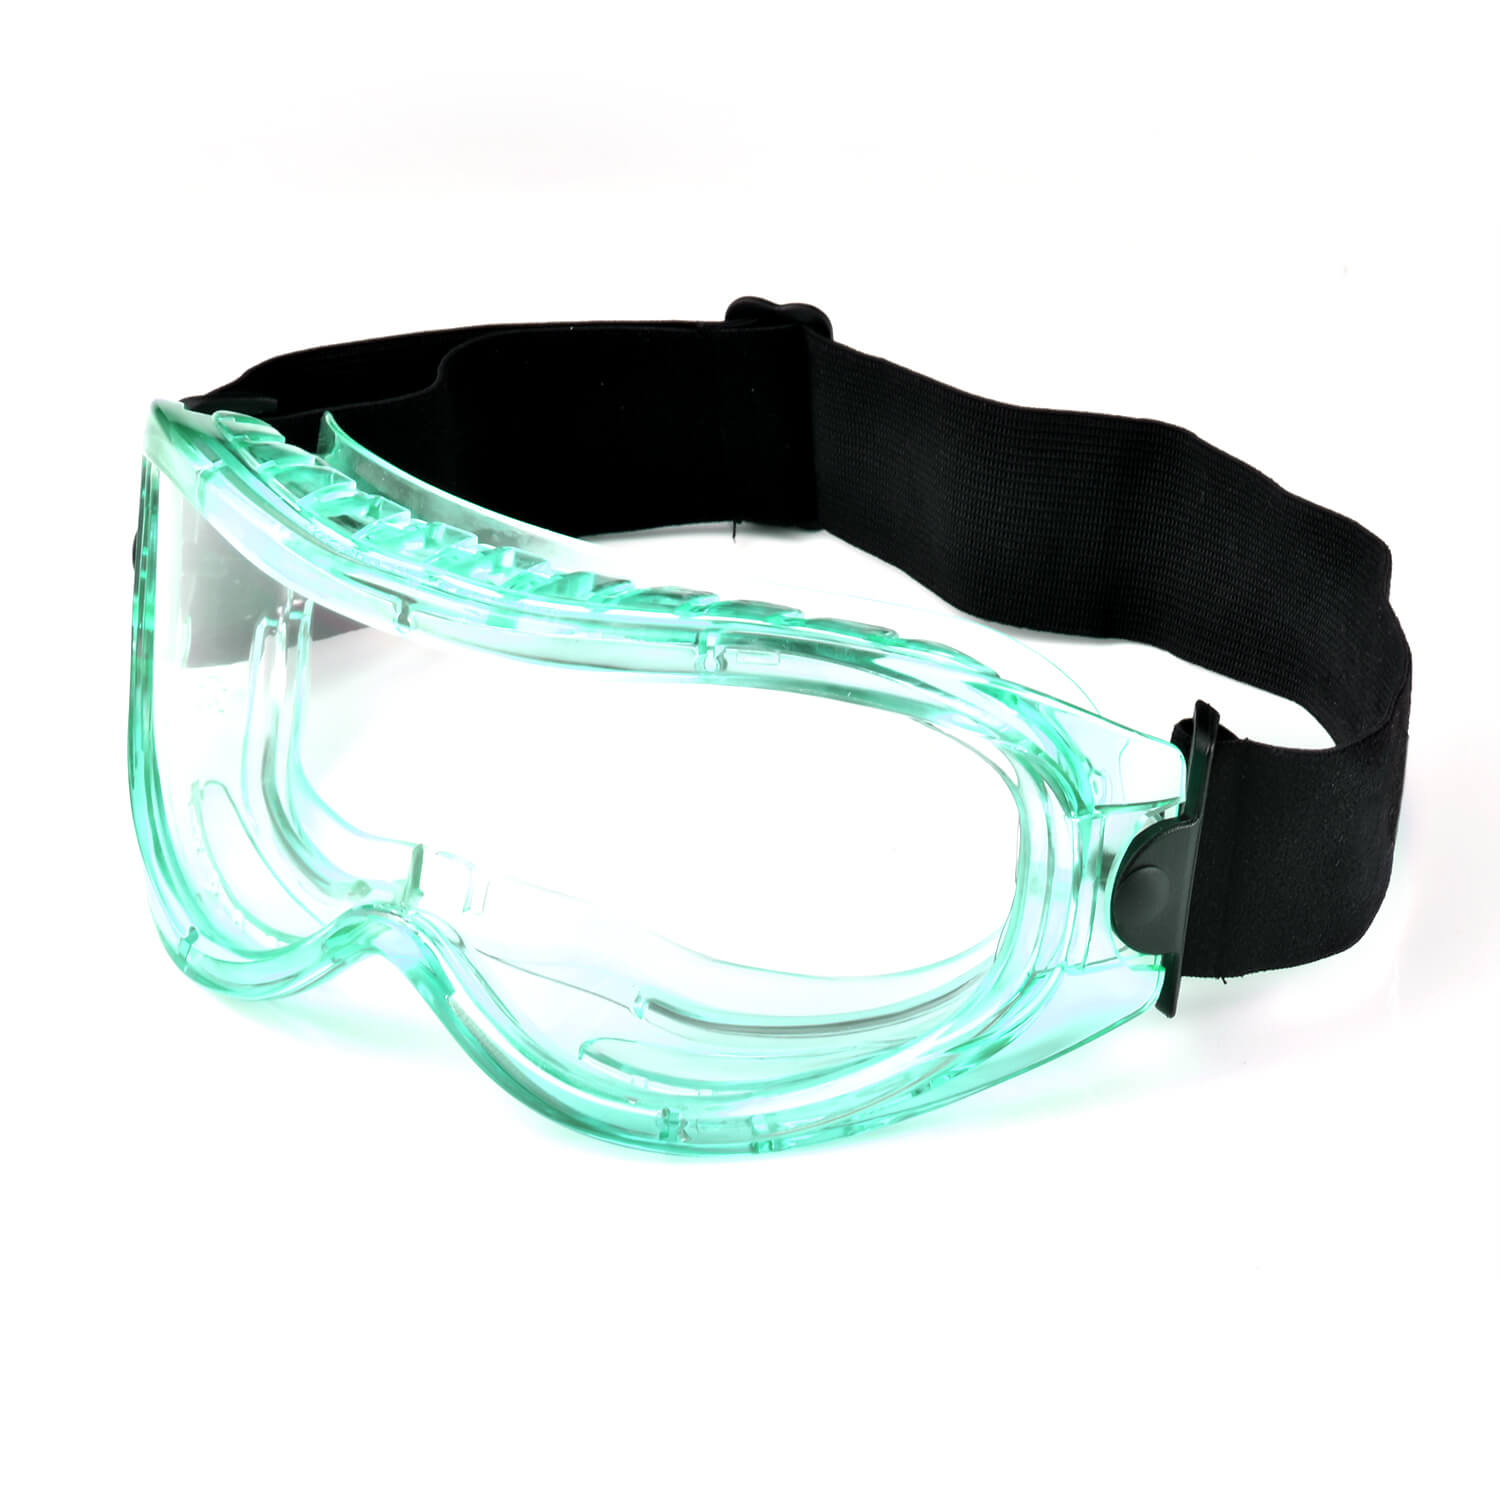 Safeyear Anti Scratch & Sealed Dust Proof Safety Goggles